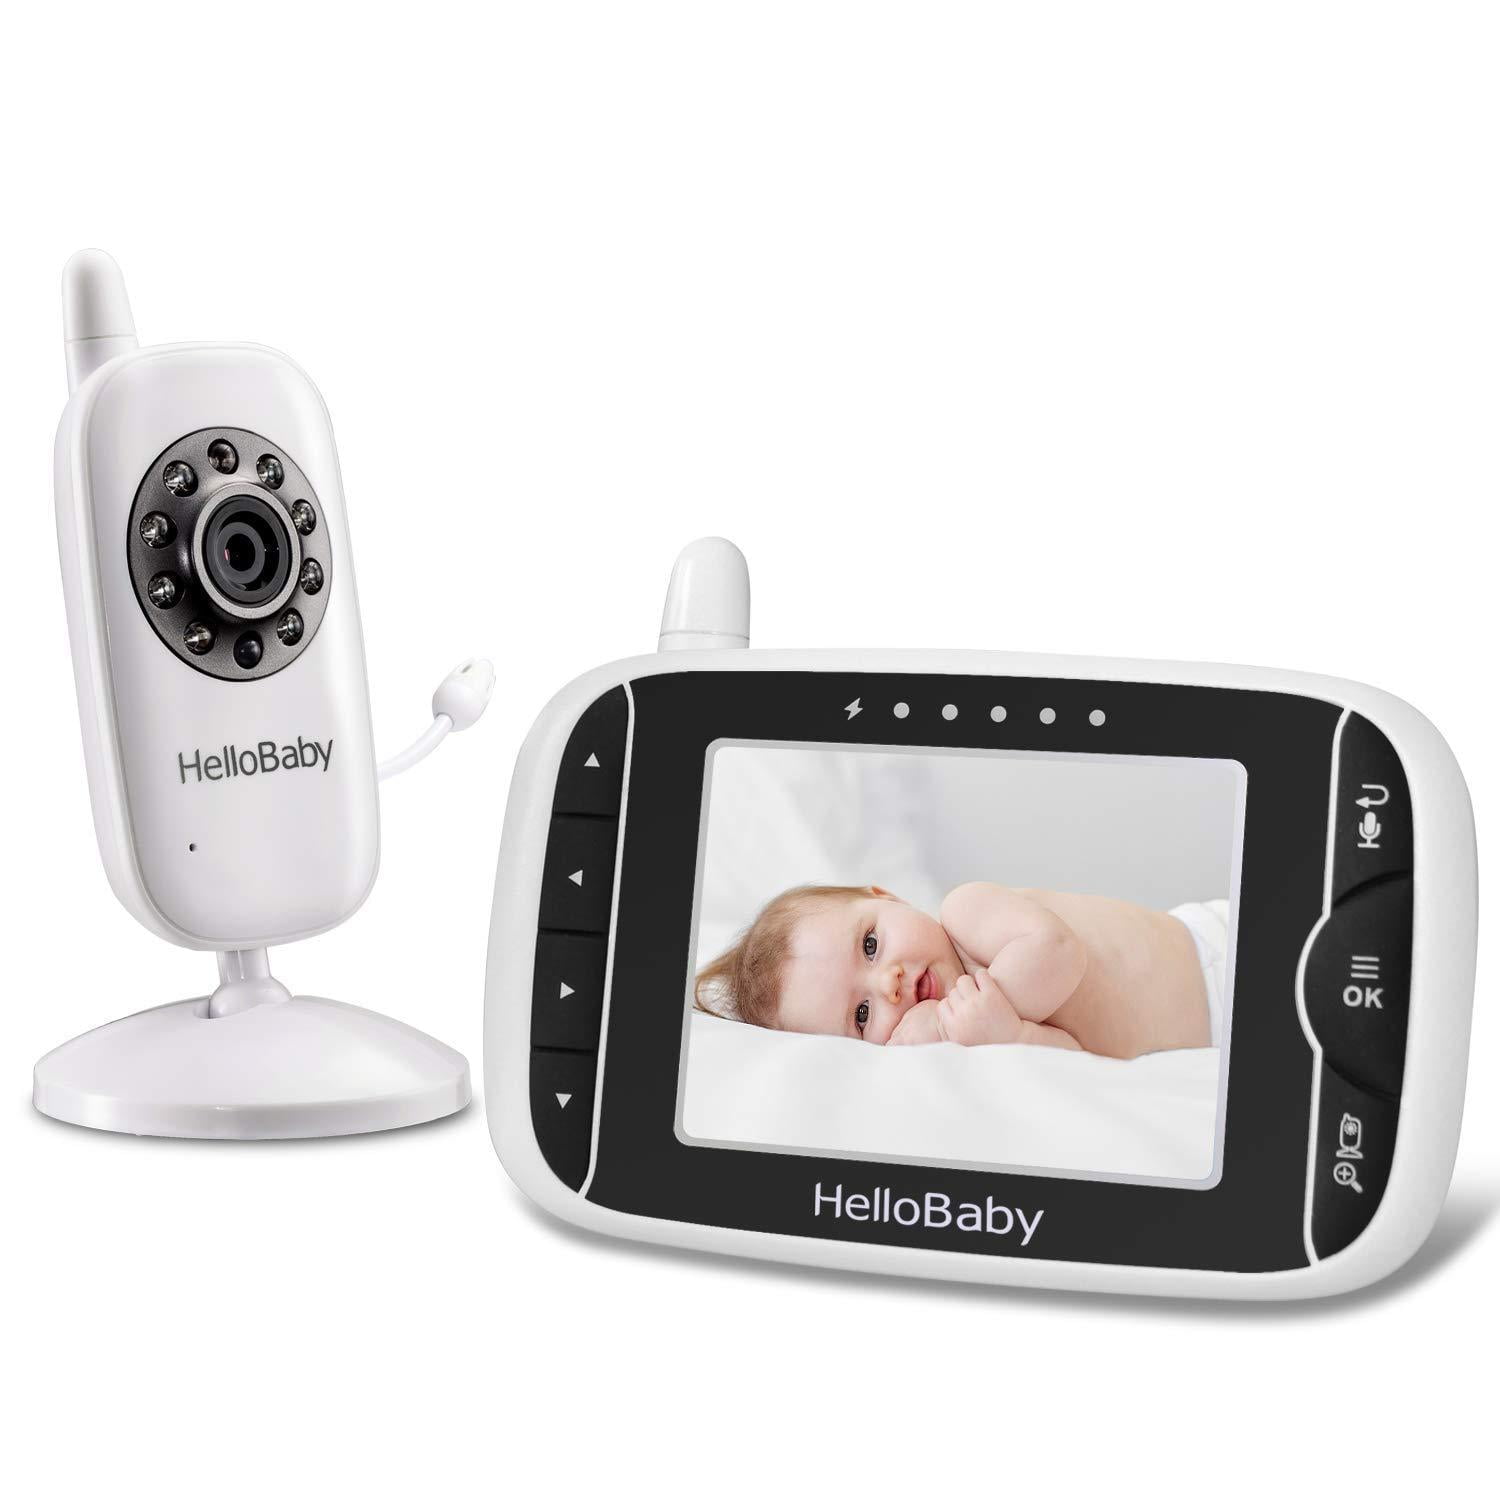 Hello Baby Video Baby Monitor with Camera and Audio, Keep Babies Nursery  with Night Vision, Talk Back, Room Temperature, Lullabies, 960ft Range and